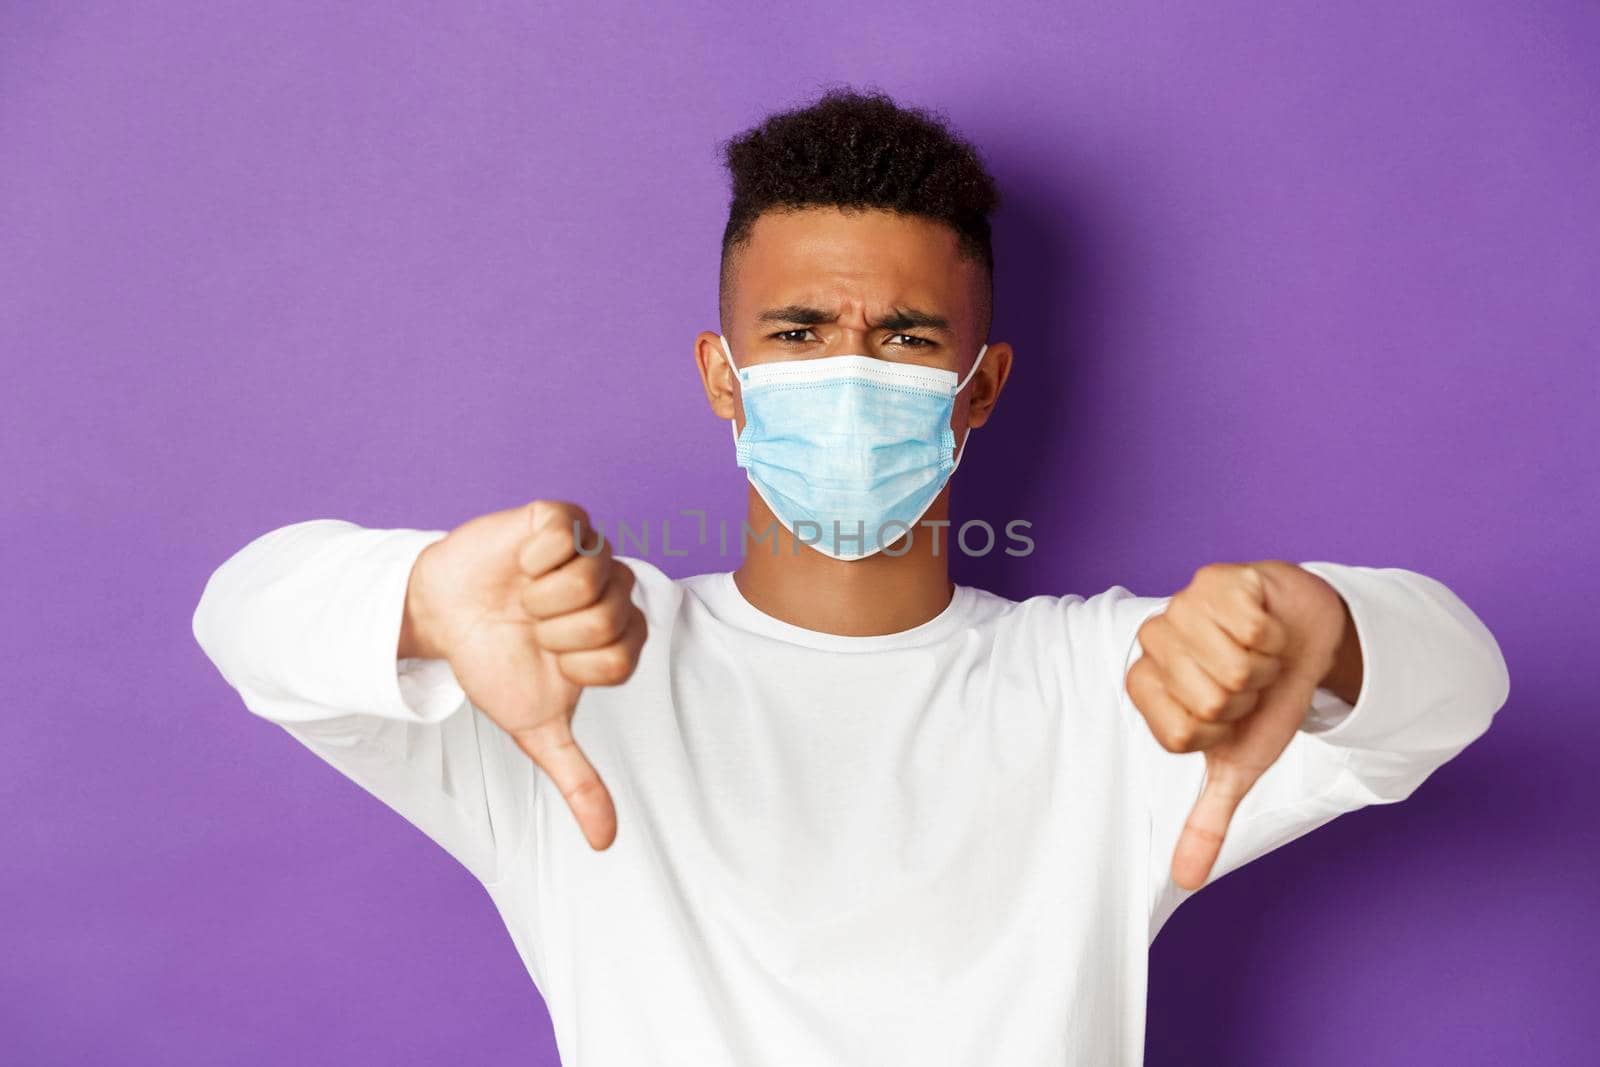 Concept of coronavirus, quarantine and social distancing. Close-up of young african-american man in medical mask showing thumbs-down, dislike something bad, standing over purple background.